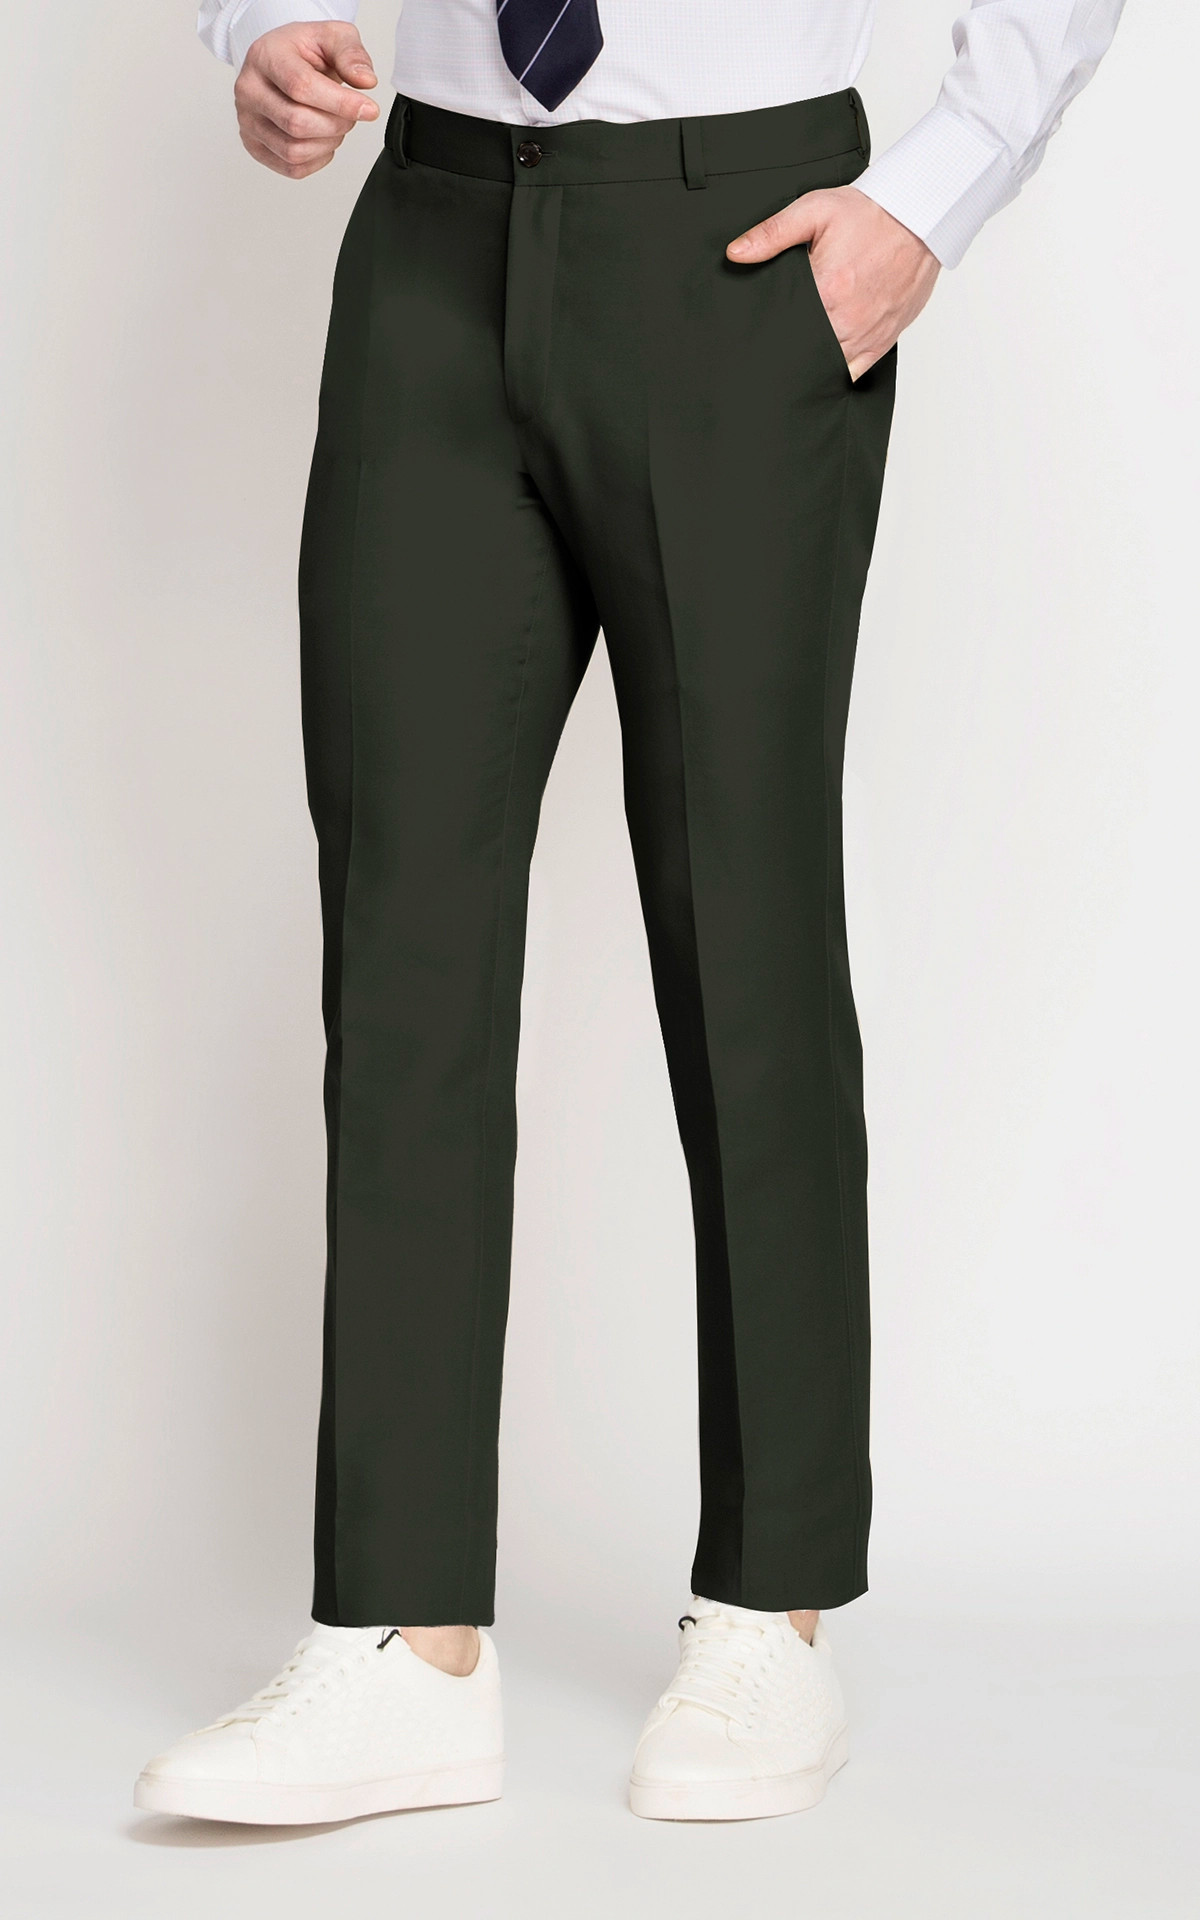 Go Colors Olivegreen Leggings - Get Best Price from Manufacturers &  Suppliers in India